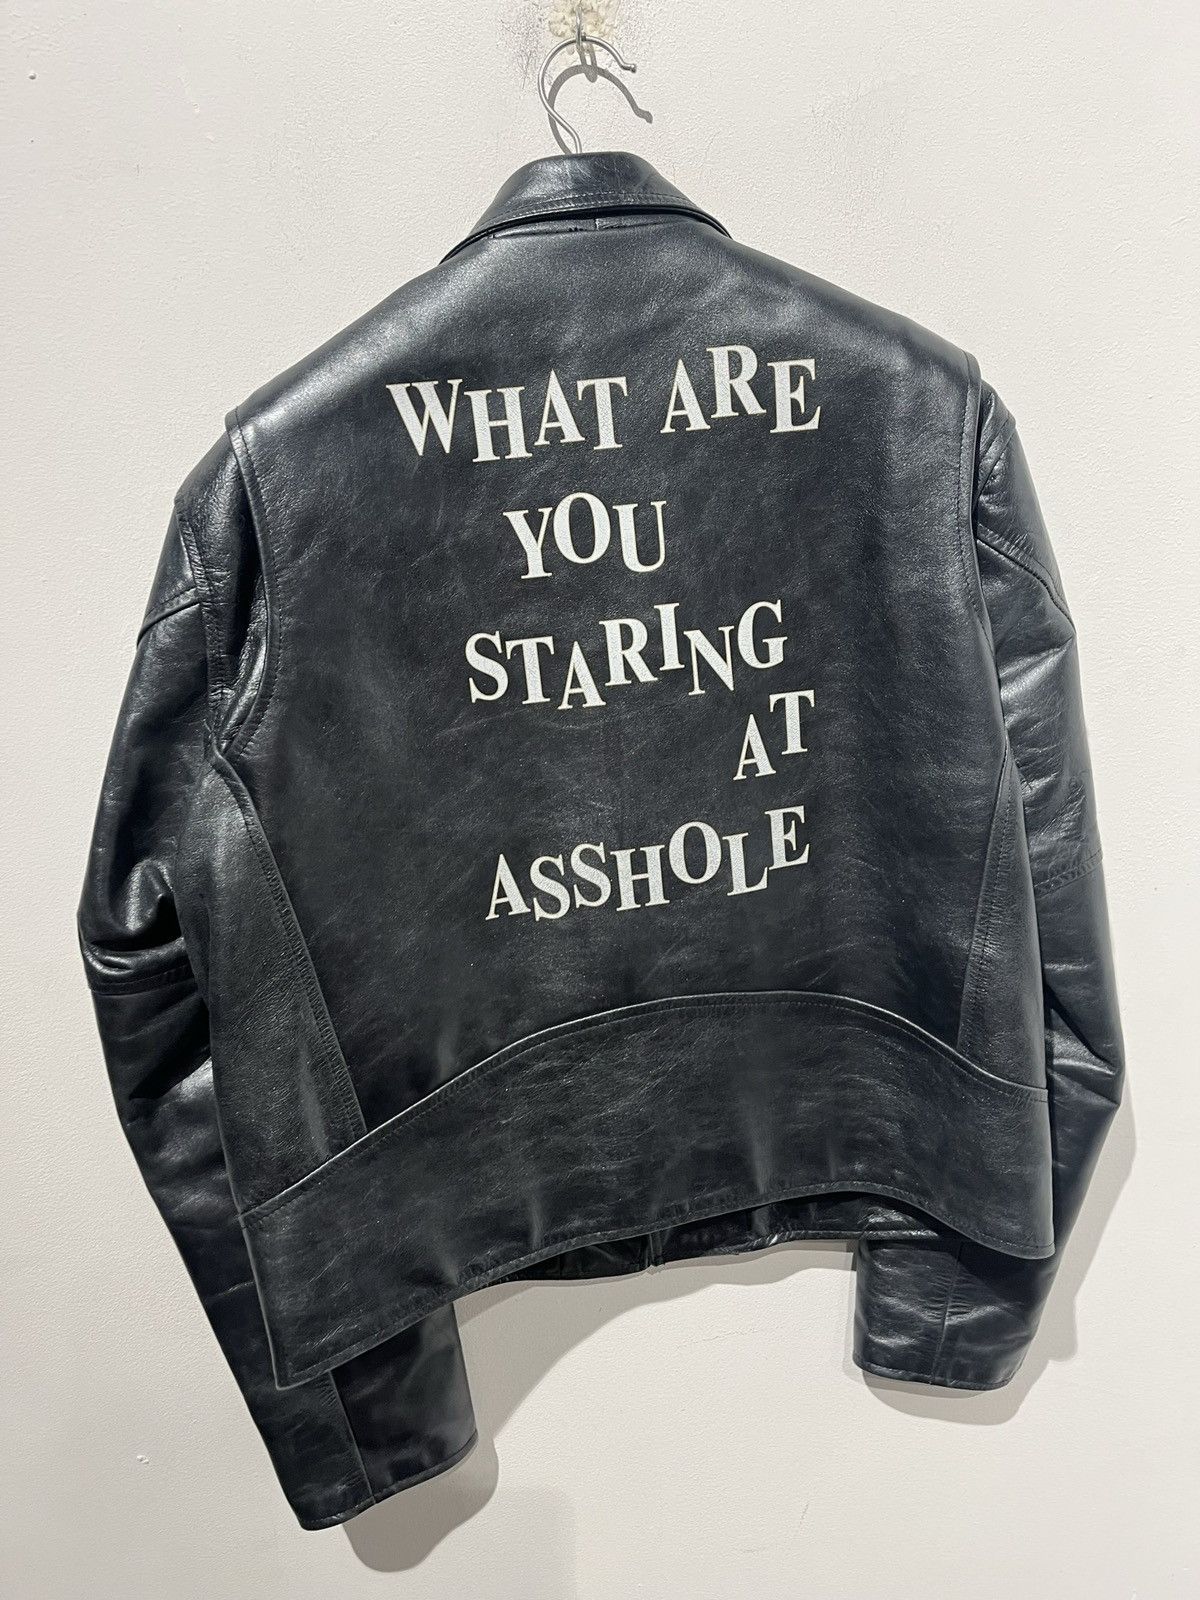 Pre-owned Enfants Riches Deprimes Erd What Are You Staring At Asshole Leather Jacket In Black